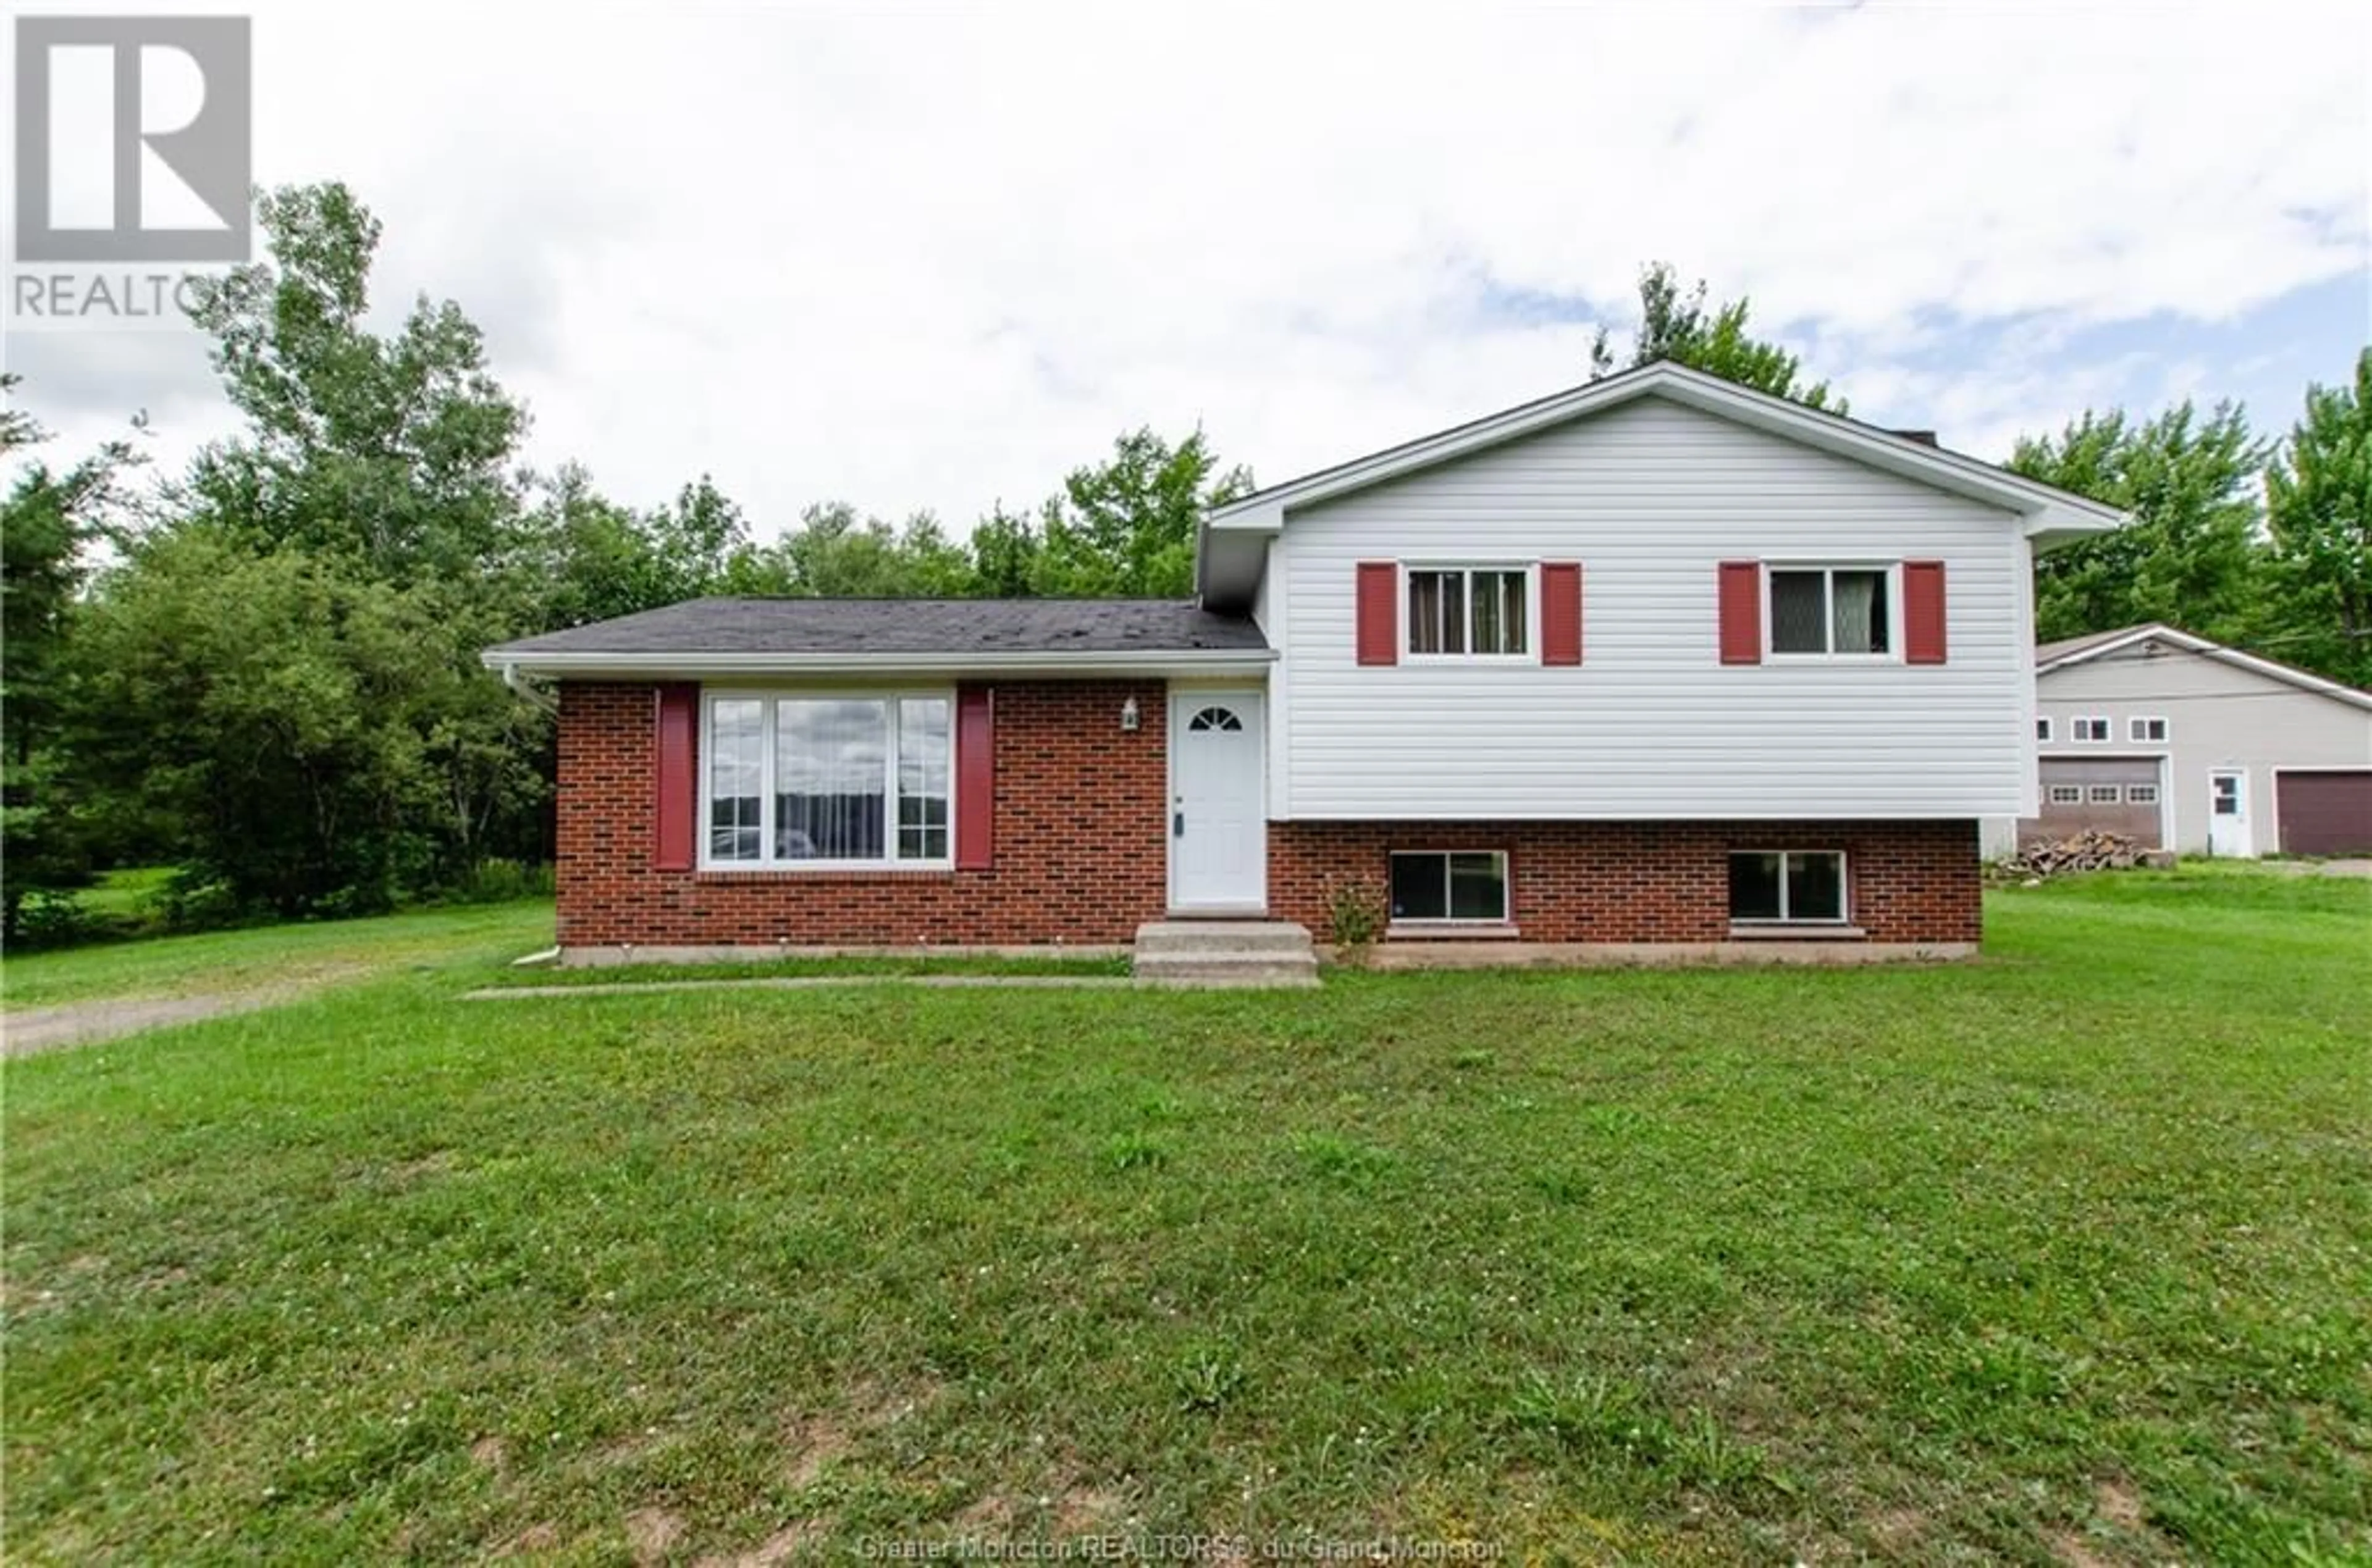 Home with brick exterior material for 2838 Route 115, Irishtown New Brunswick E1H2N2